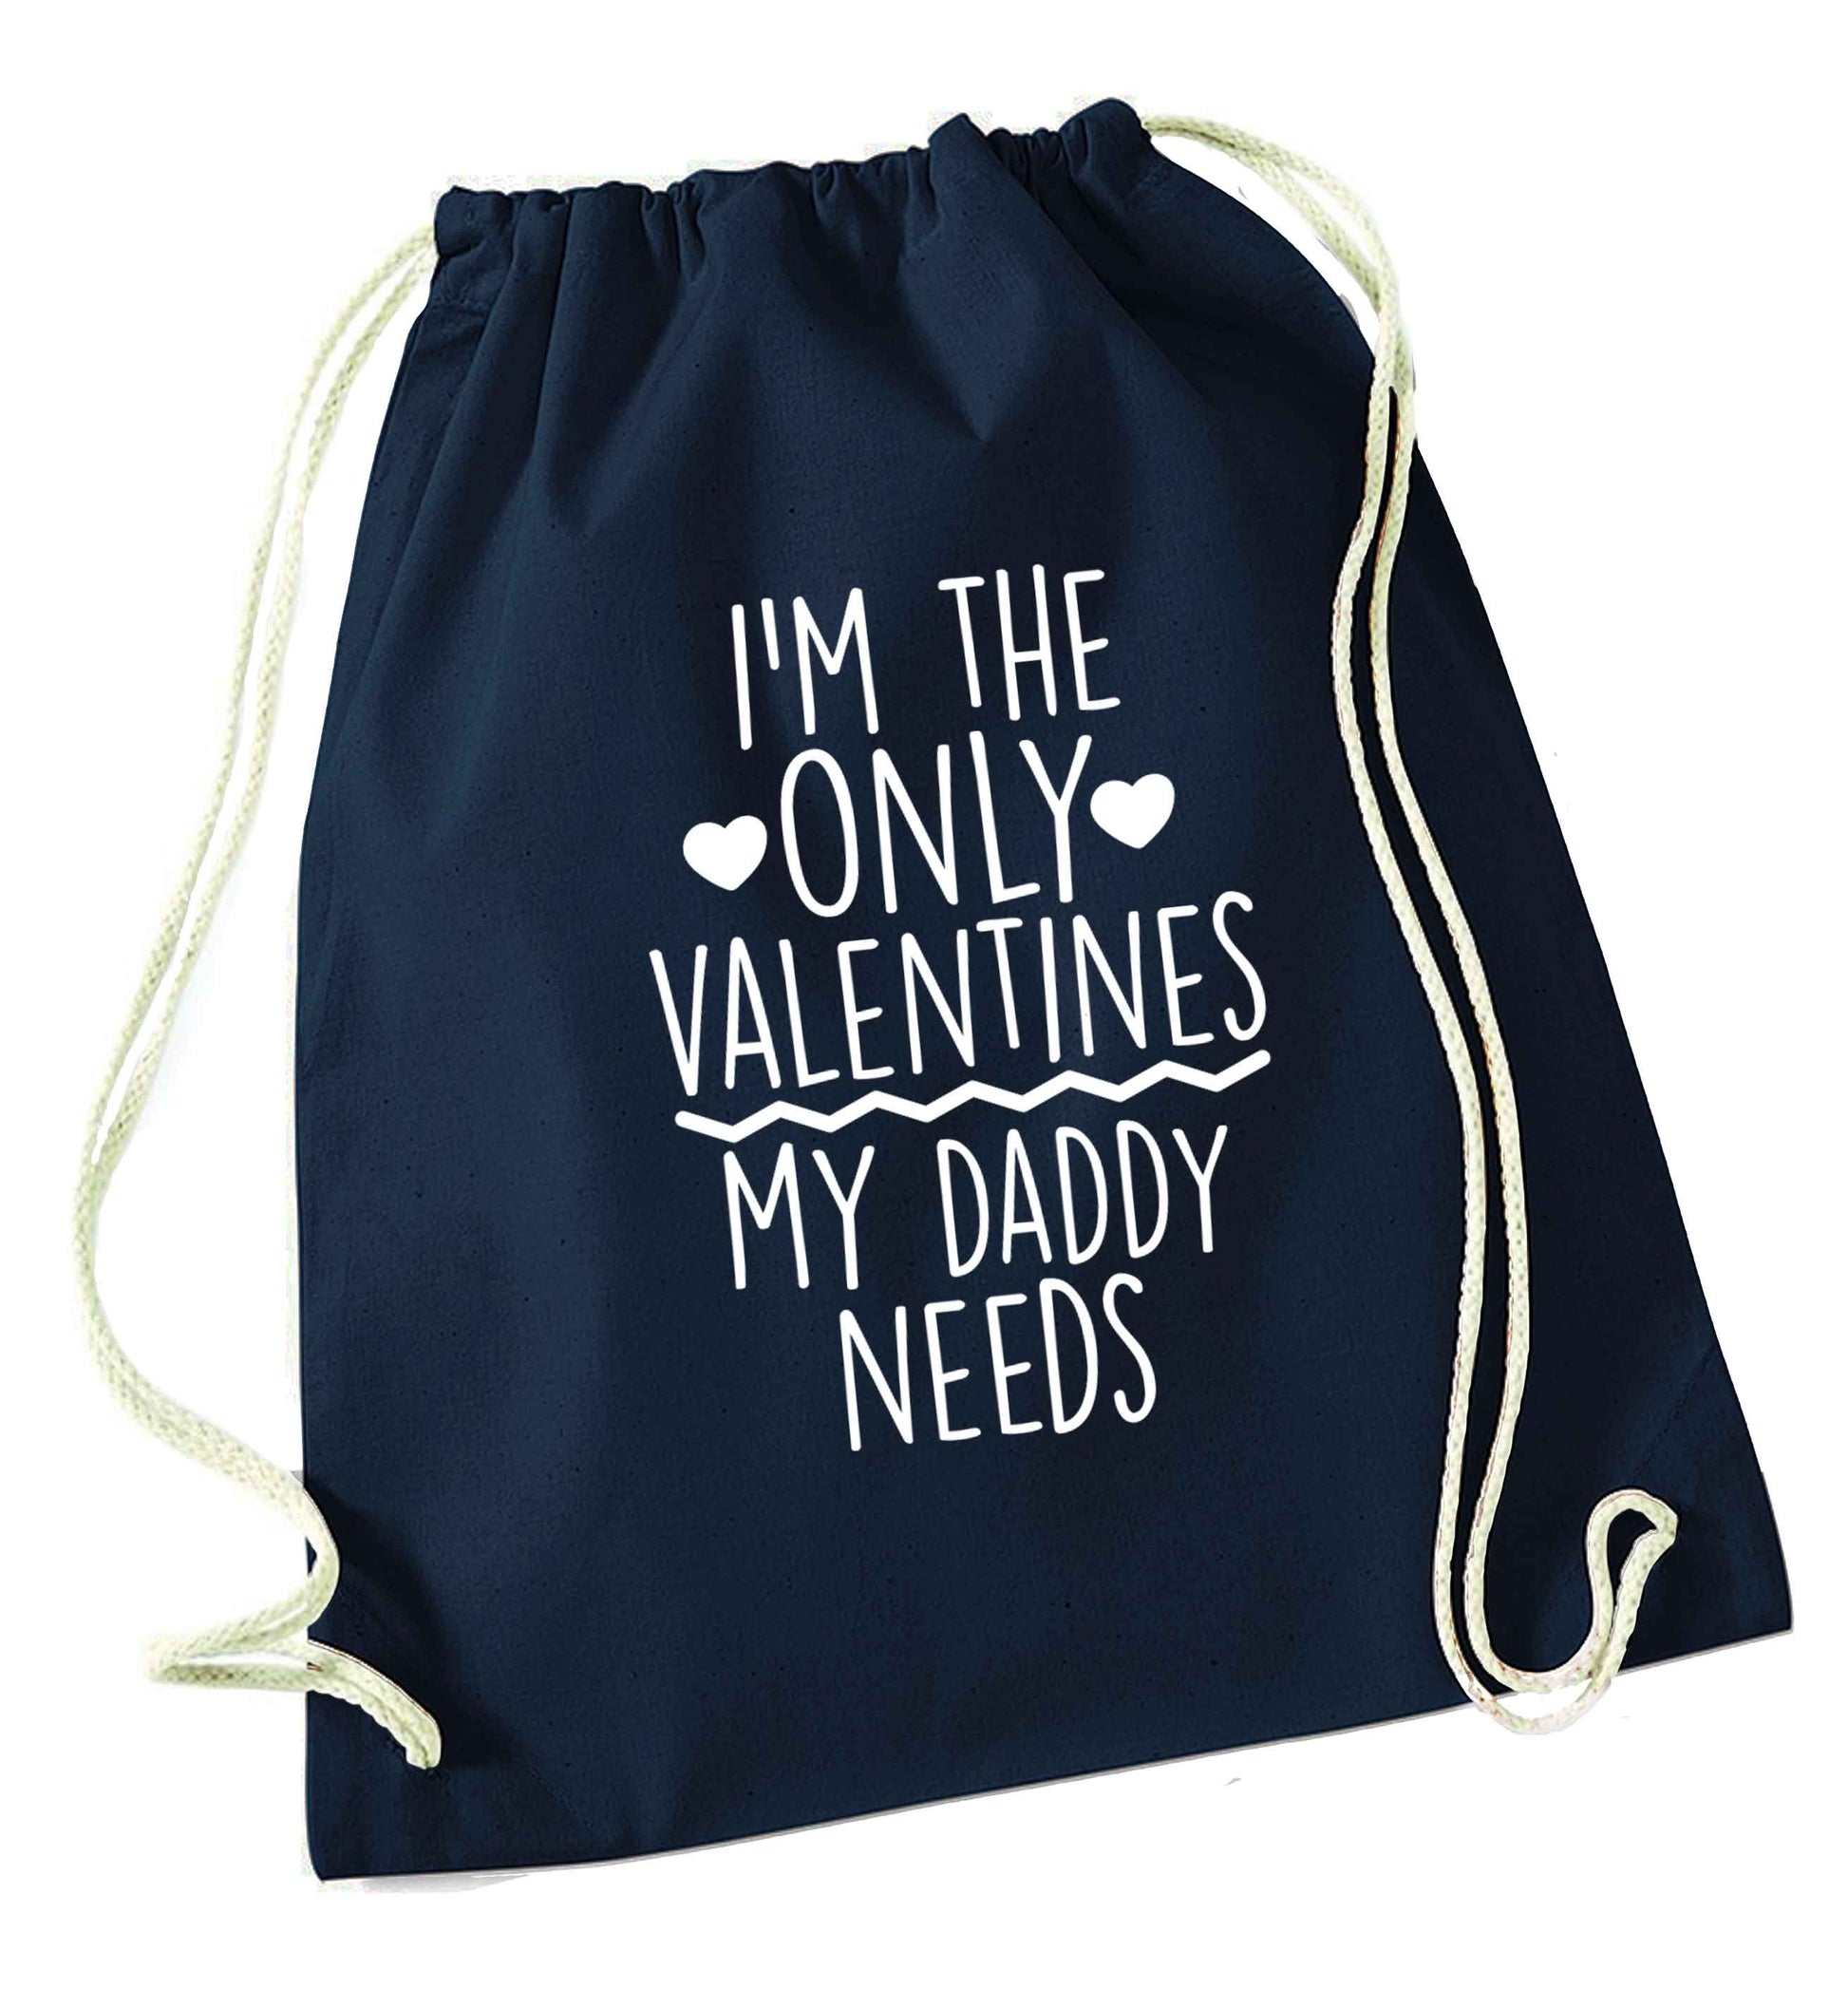 I'm the only valentines my daddy needs navy drawstring bag